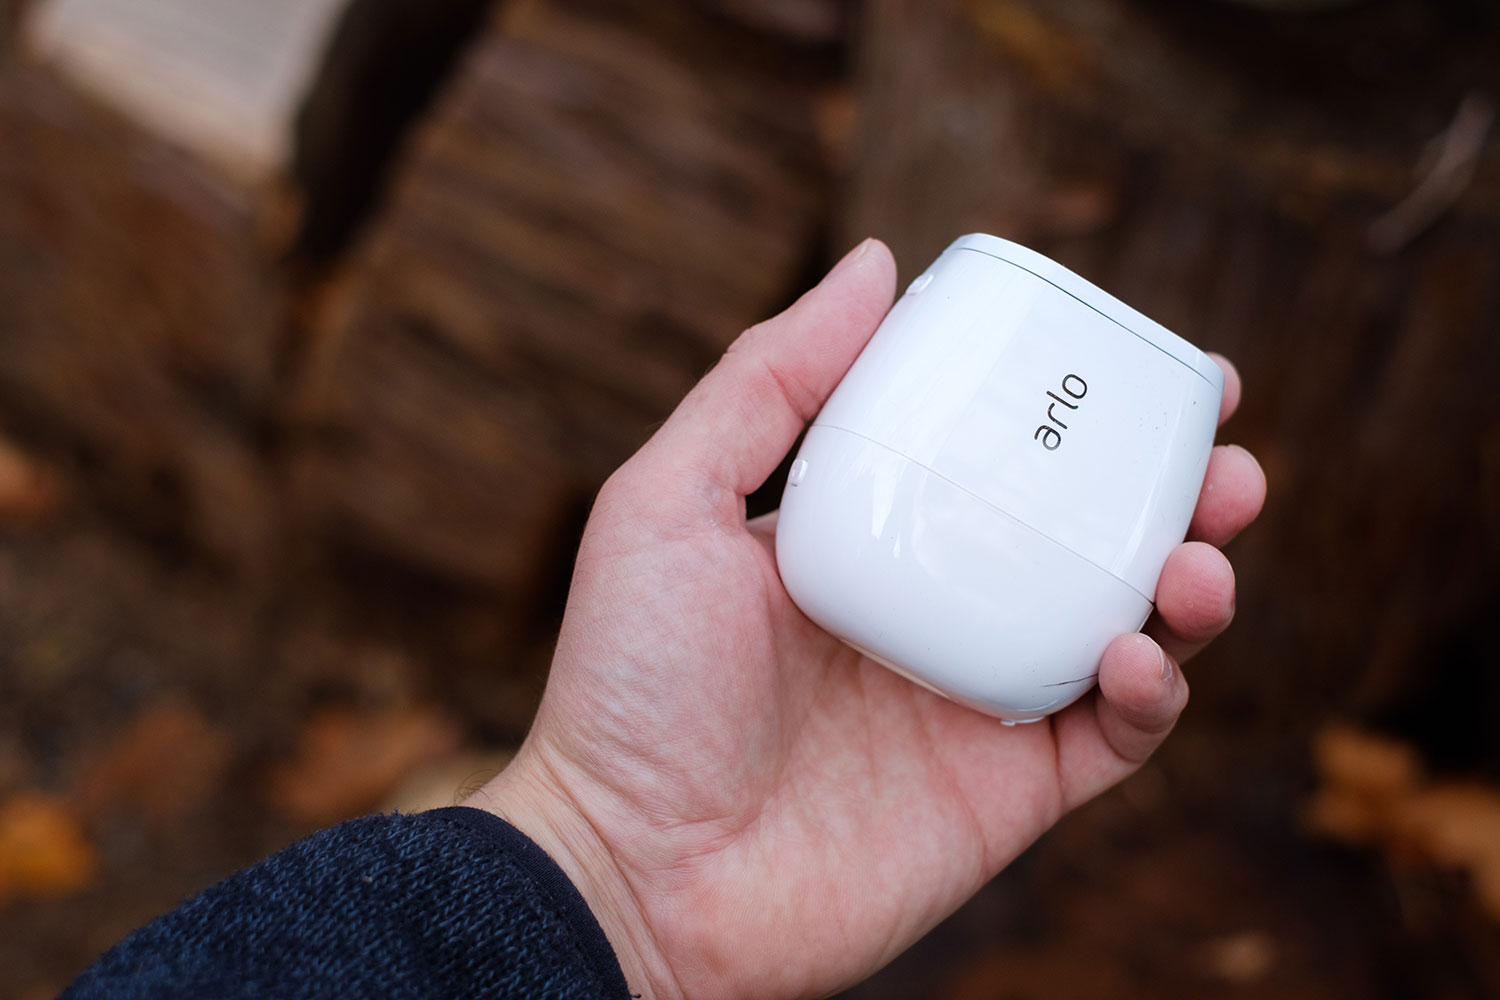 Arlo Pro 2 Review: Top Of Line Security Camera | Digital Trends